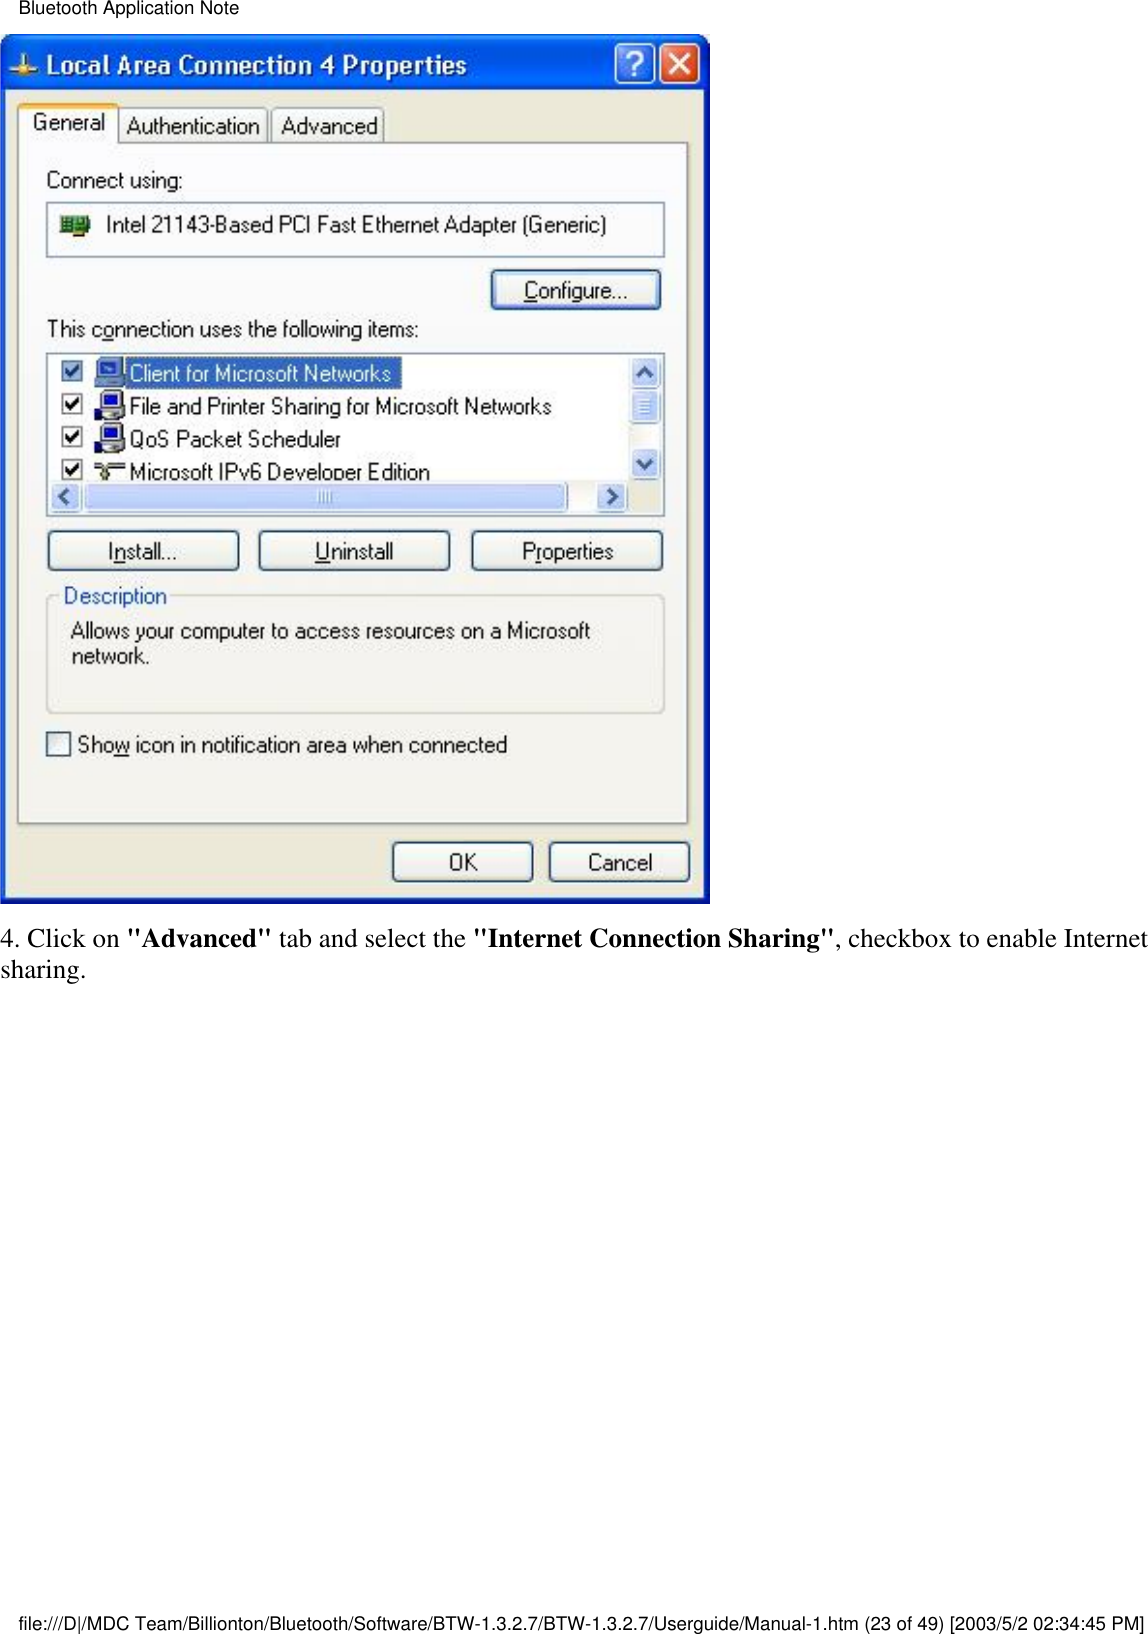 4. Click on &quot;Advanced&quot; tab and select the &quot;Internet Connection Sharing&quot;, checkbox to enable Internetsharing.Bluetooth Application Notefile:///D|/MDC Team/Billionton/Bluetooth/Software/BTW-1.3.2.7/BTW-1.3.2.7/Userguide/Manual-1.htm (23 of 49) [2003/5/2 02:34:45 PM]